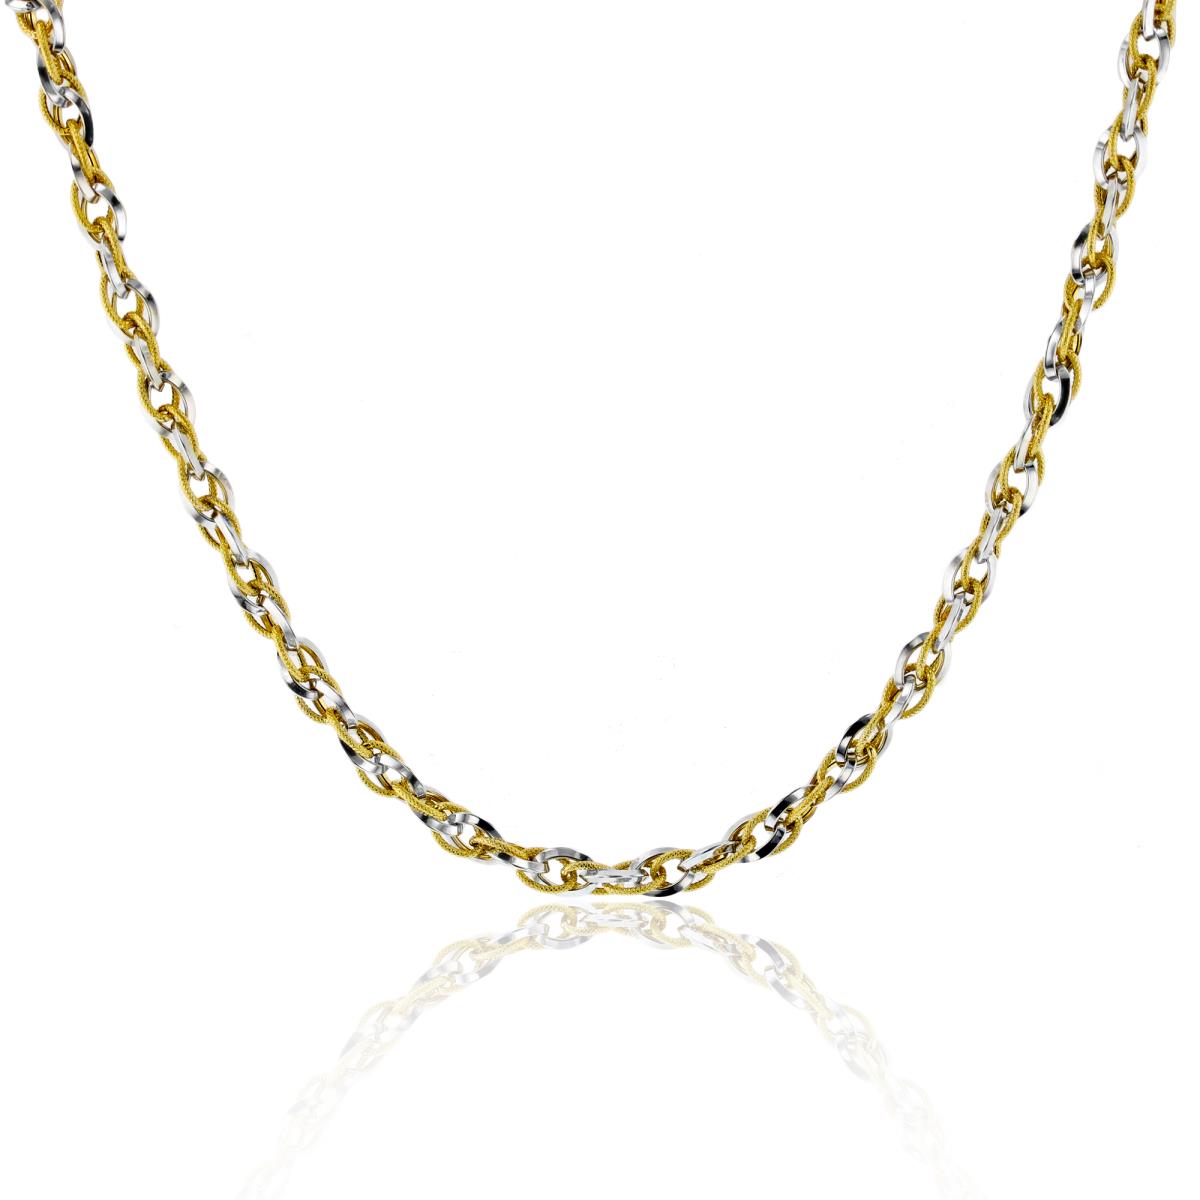 10K Two-Tone Gold Polished & Textured Triple Oval Linked Italian 19"Necklace